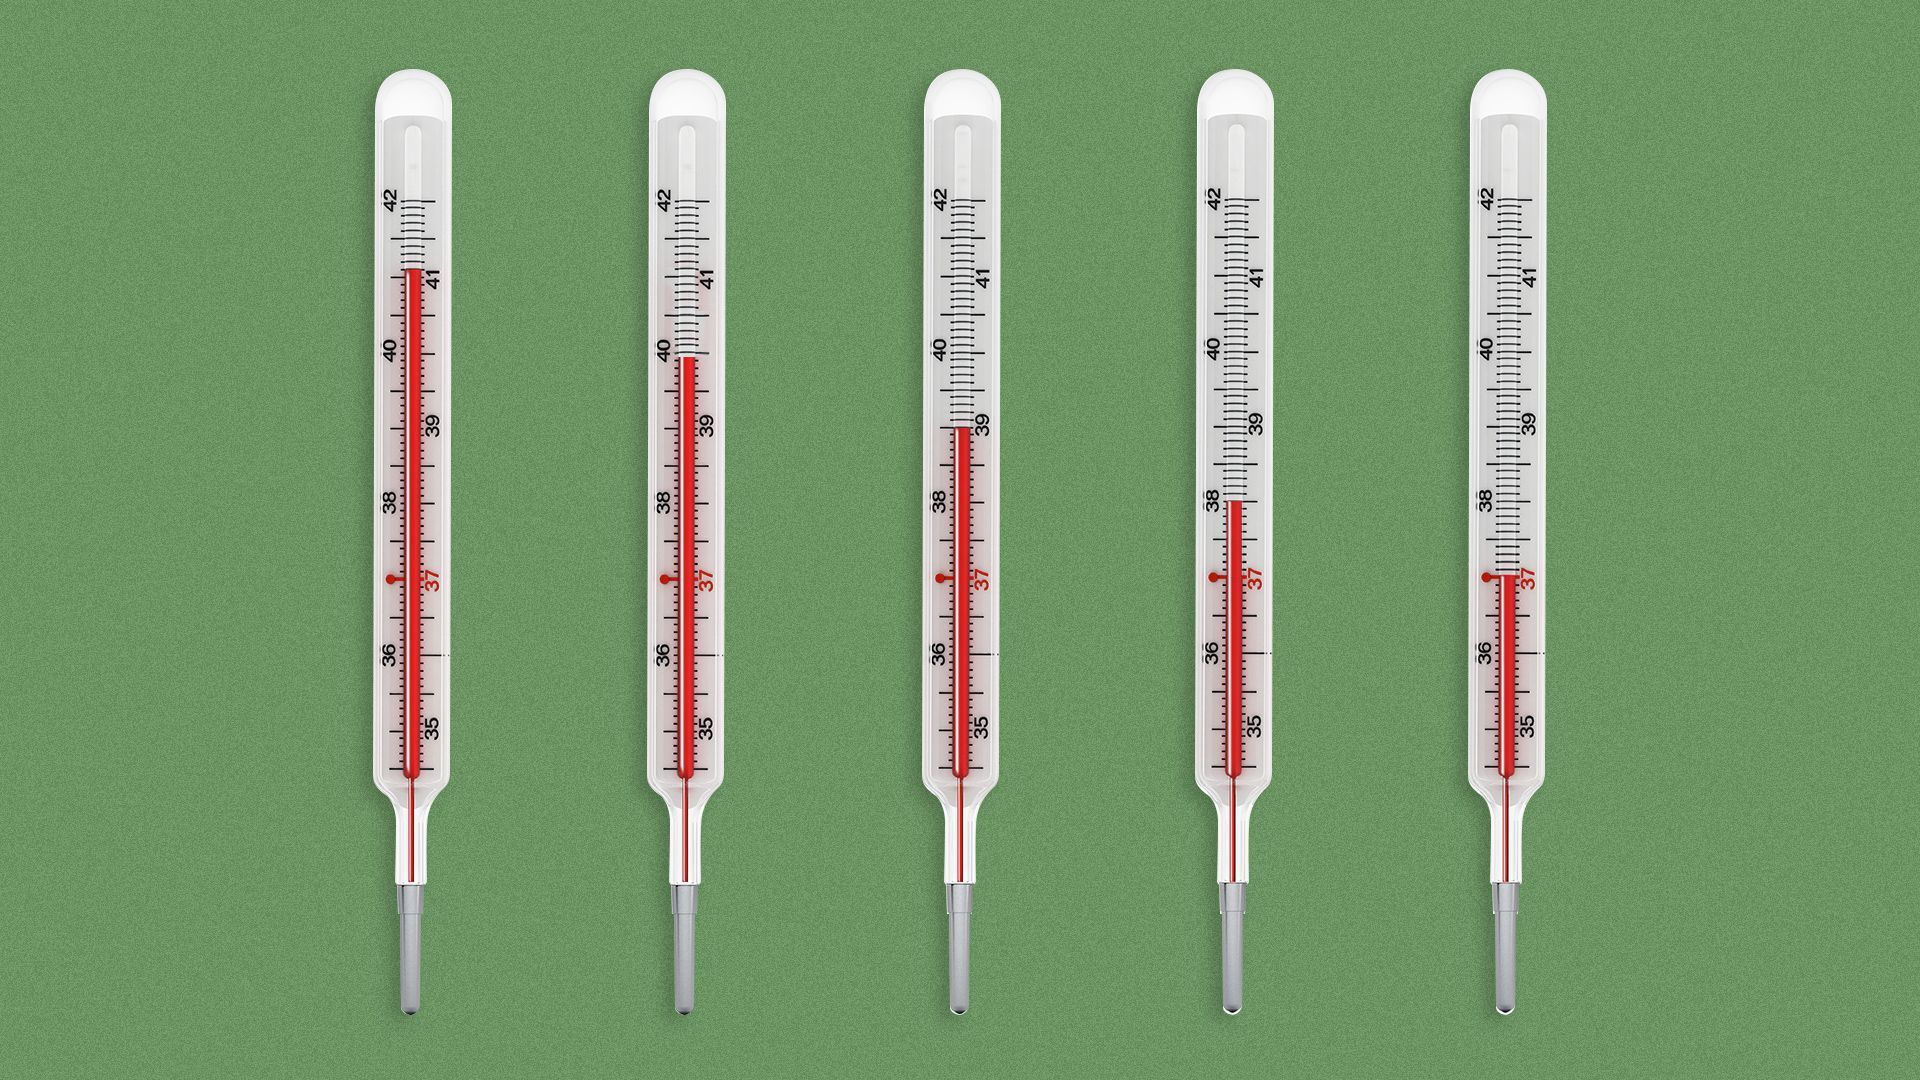 Illustration of a set of thermometers showing a progressively lower temperature.  